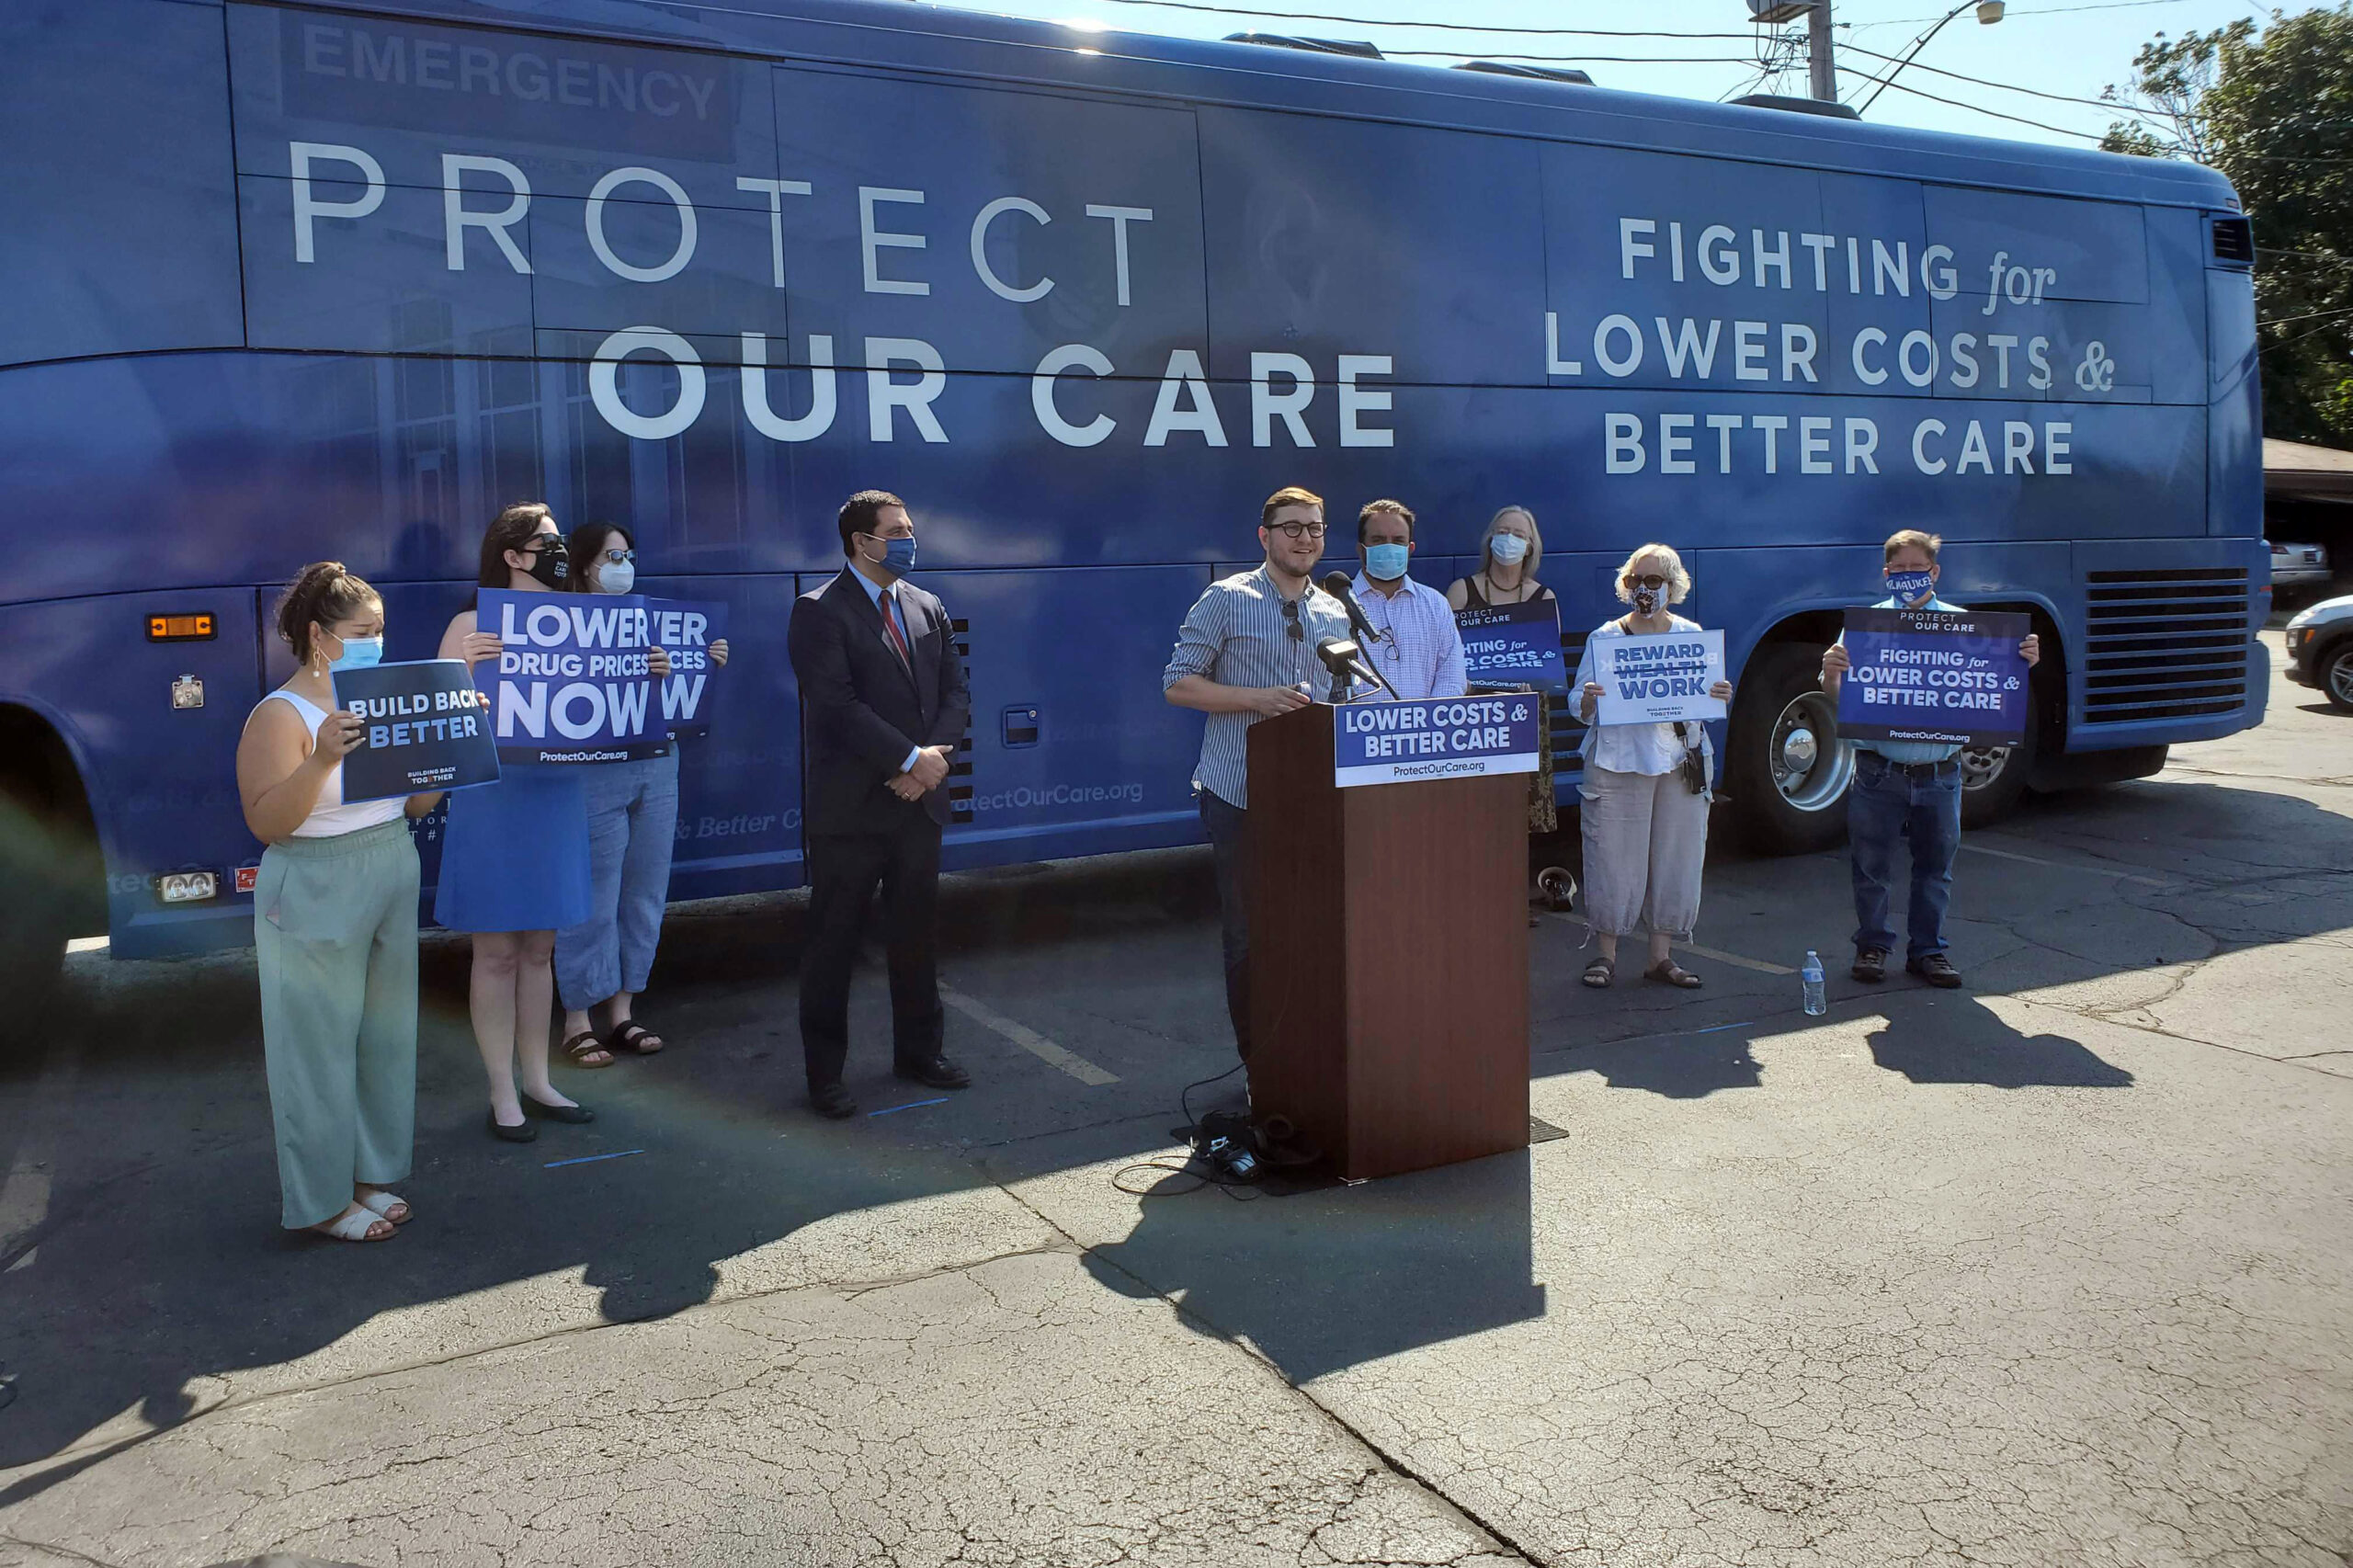 Dustin Klein speaks at an event calling for lower health care costs